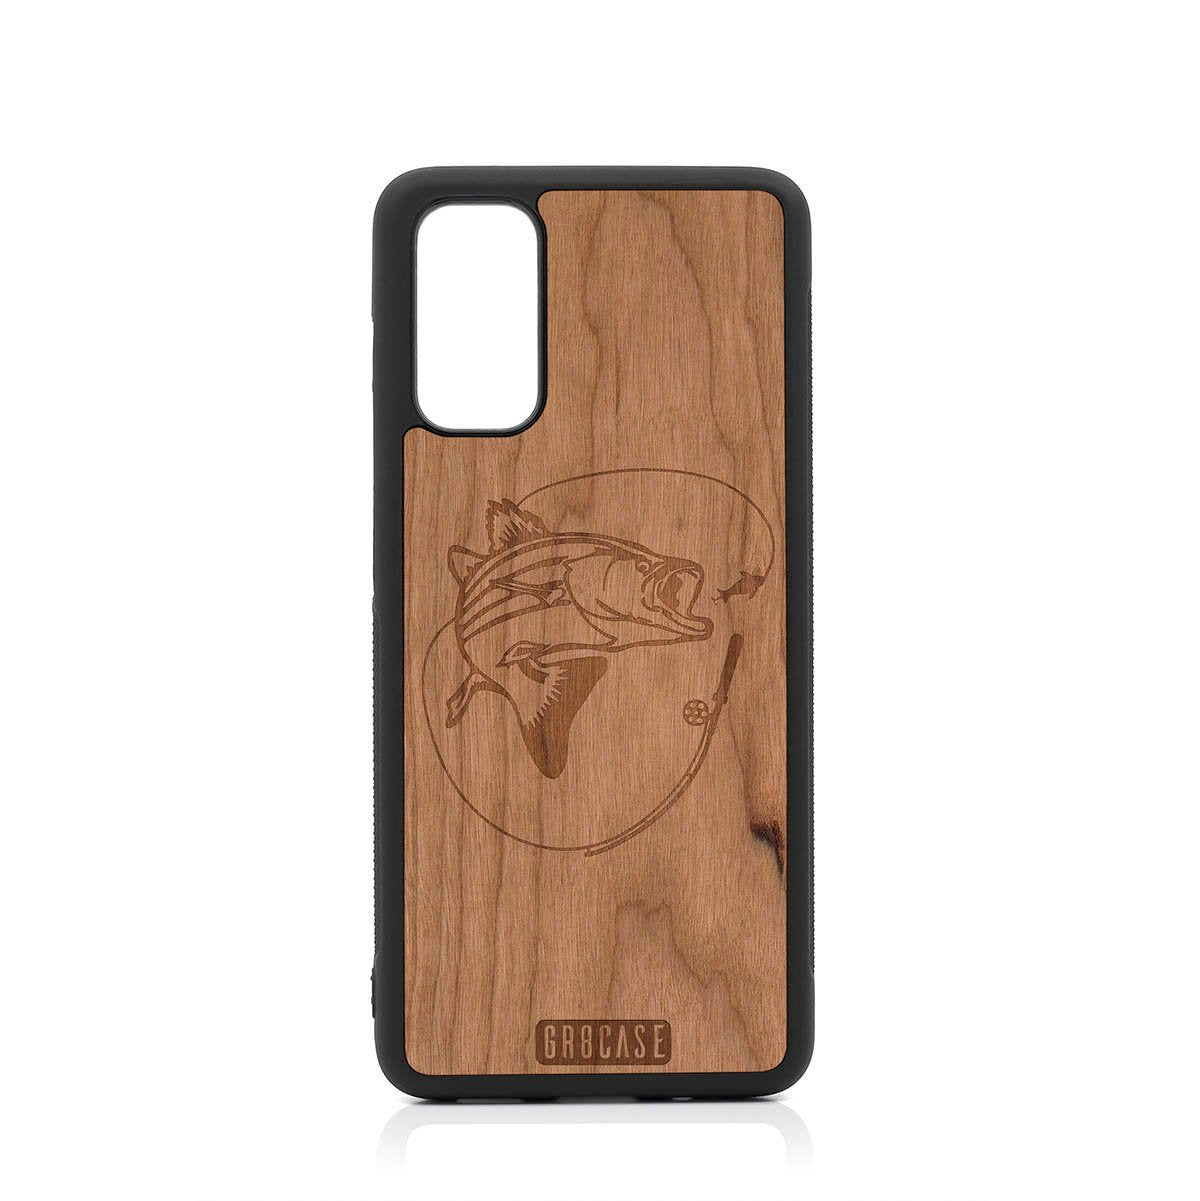 Fish and Reel Design Wood Case For Samsung Galaxy S20 FE 5G by GR8CASE